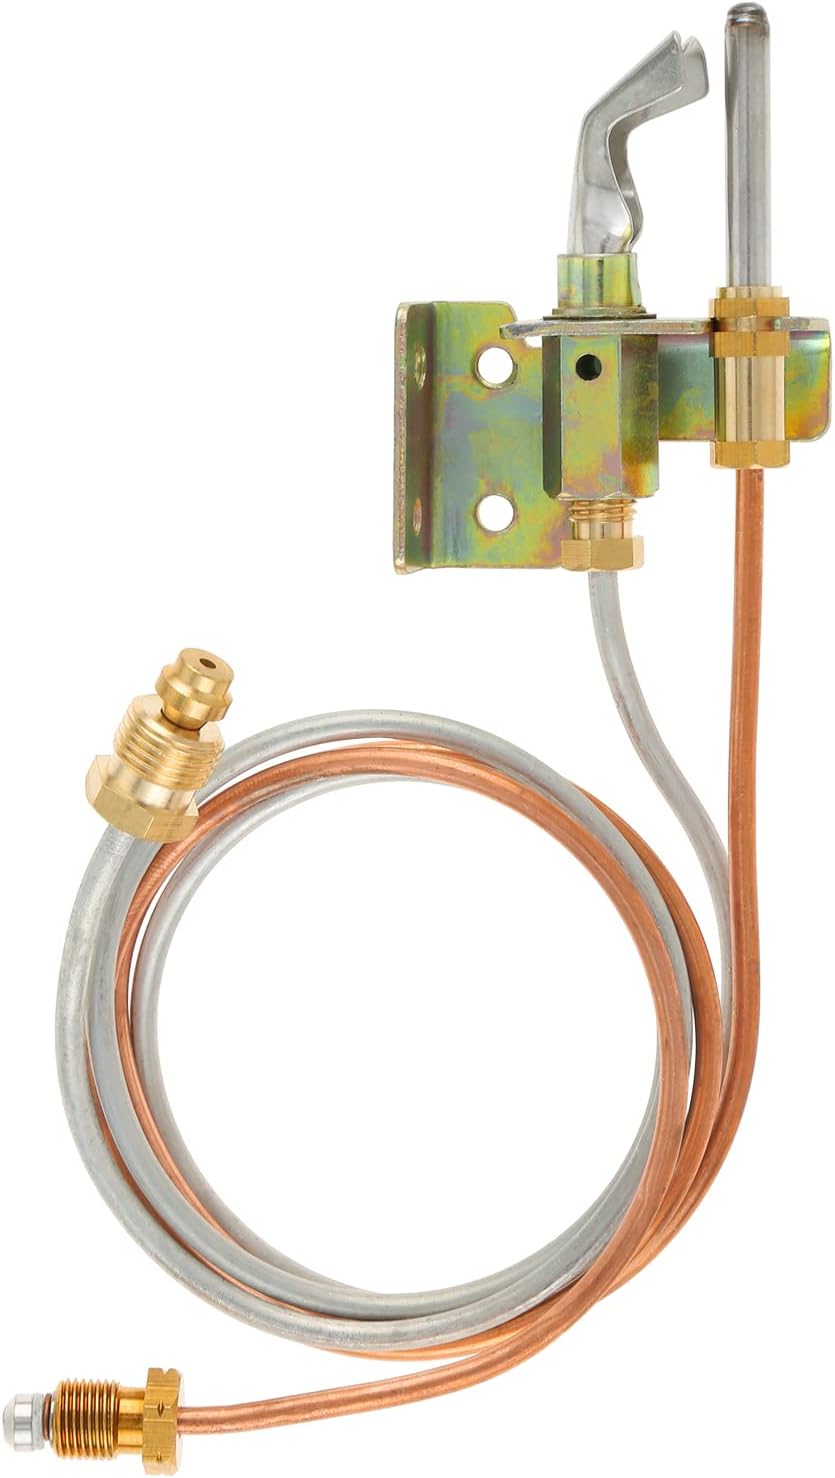 Water Heater Pilot Assembly for Tubing Lp Propane Gas, [...]